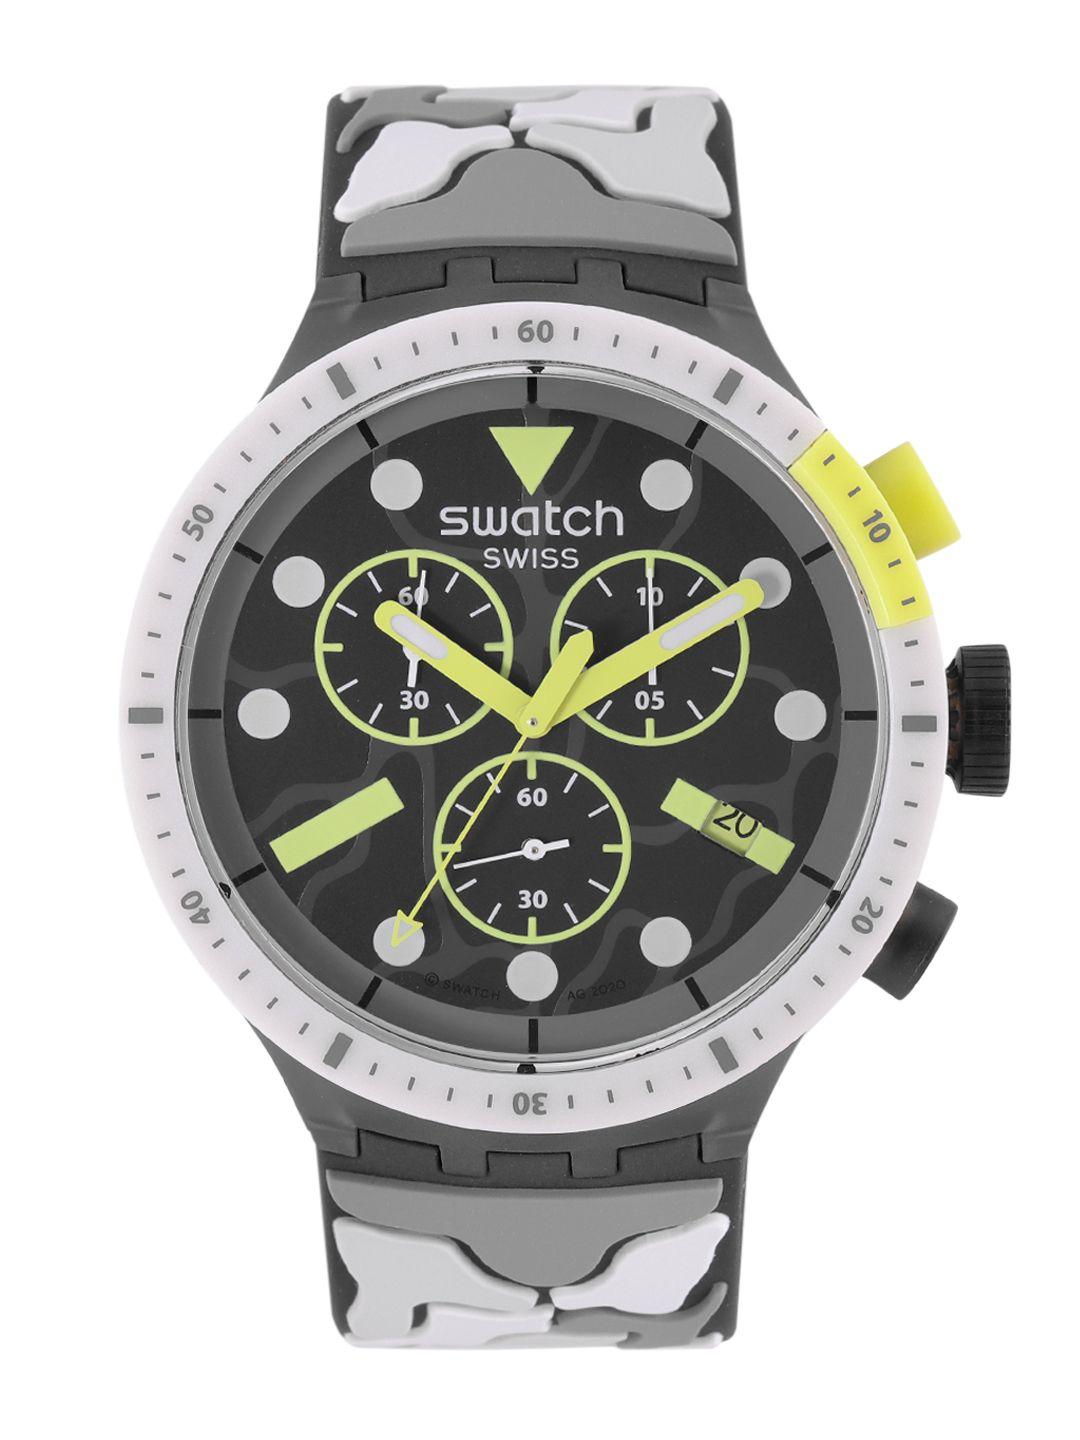 swatch unisex charcoal grey patterned swiss made water resistant analogue watch sb02m400